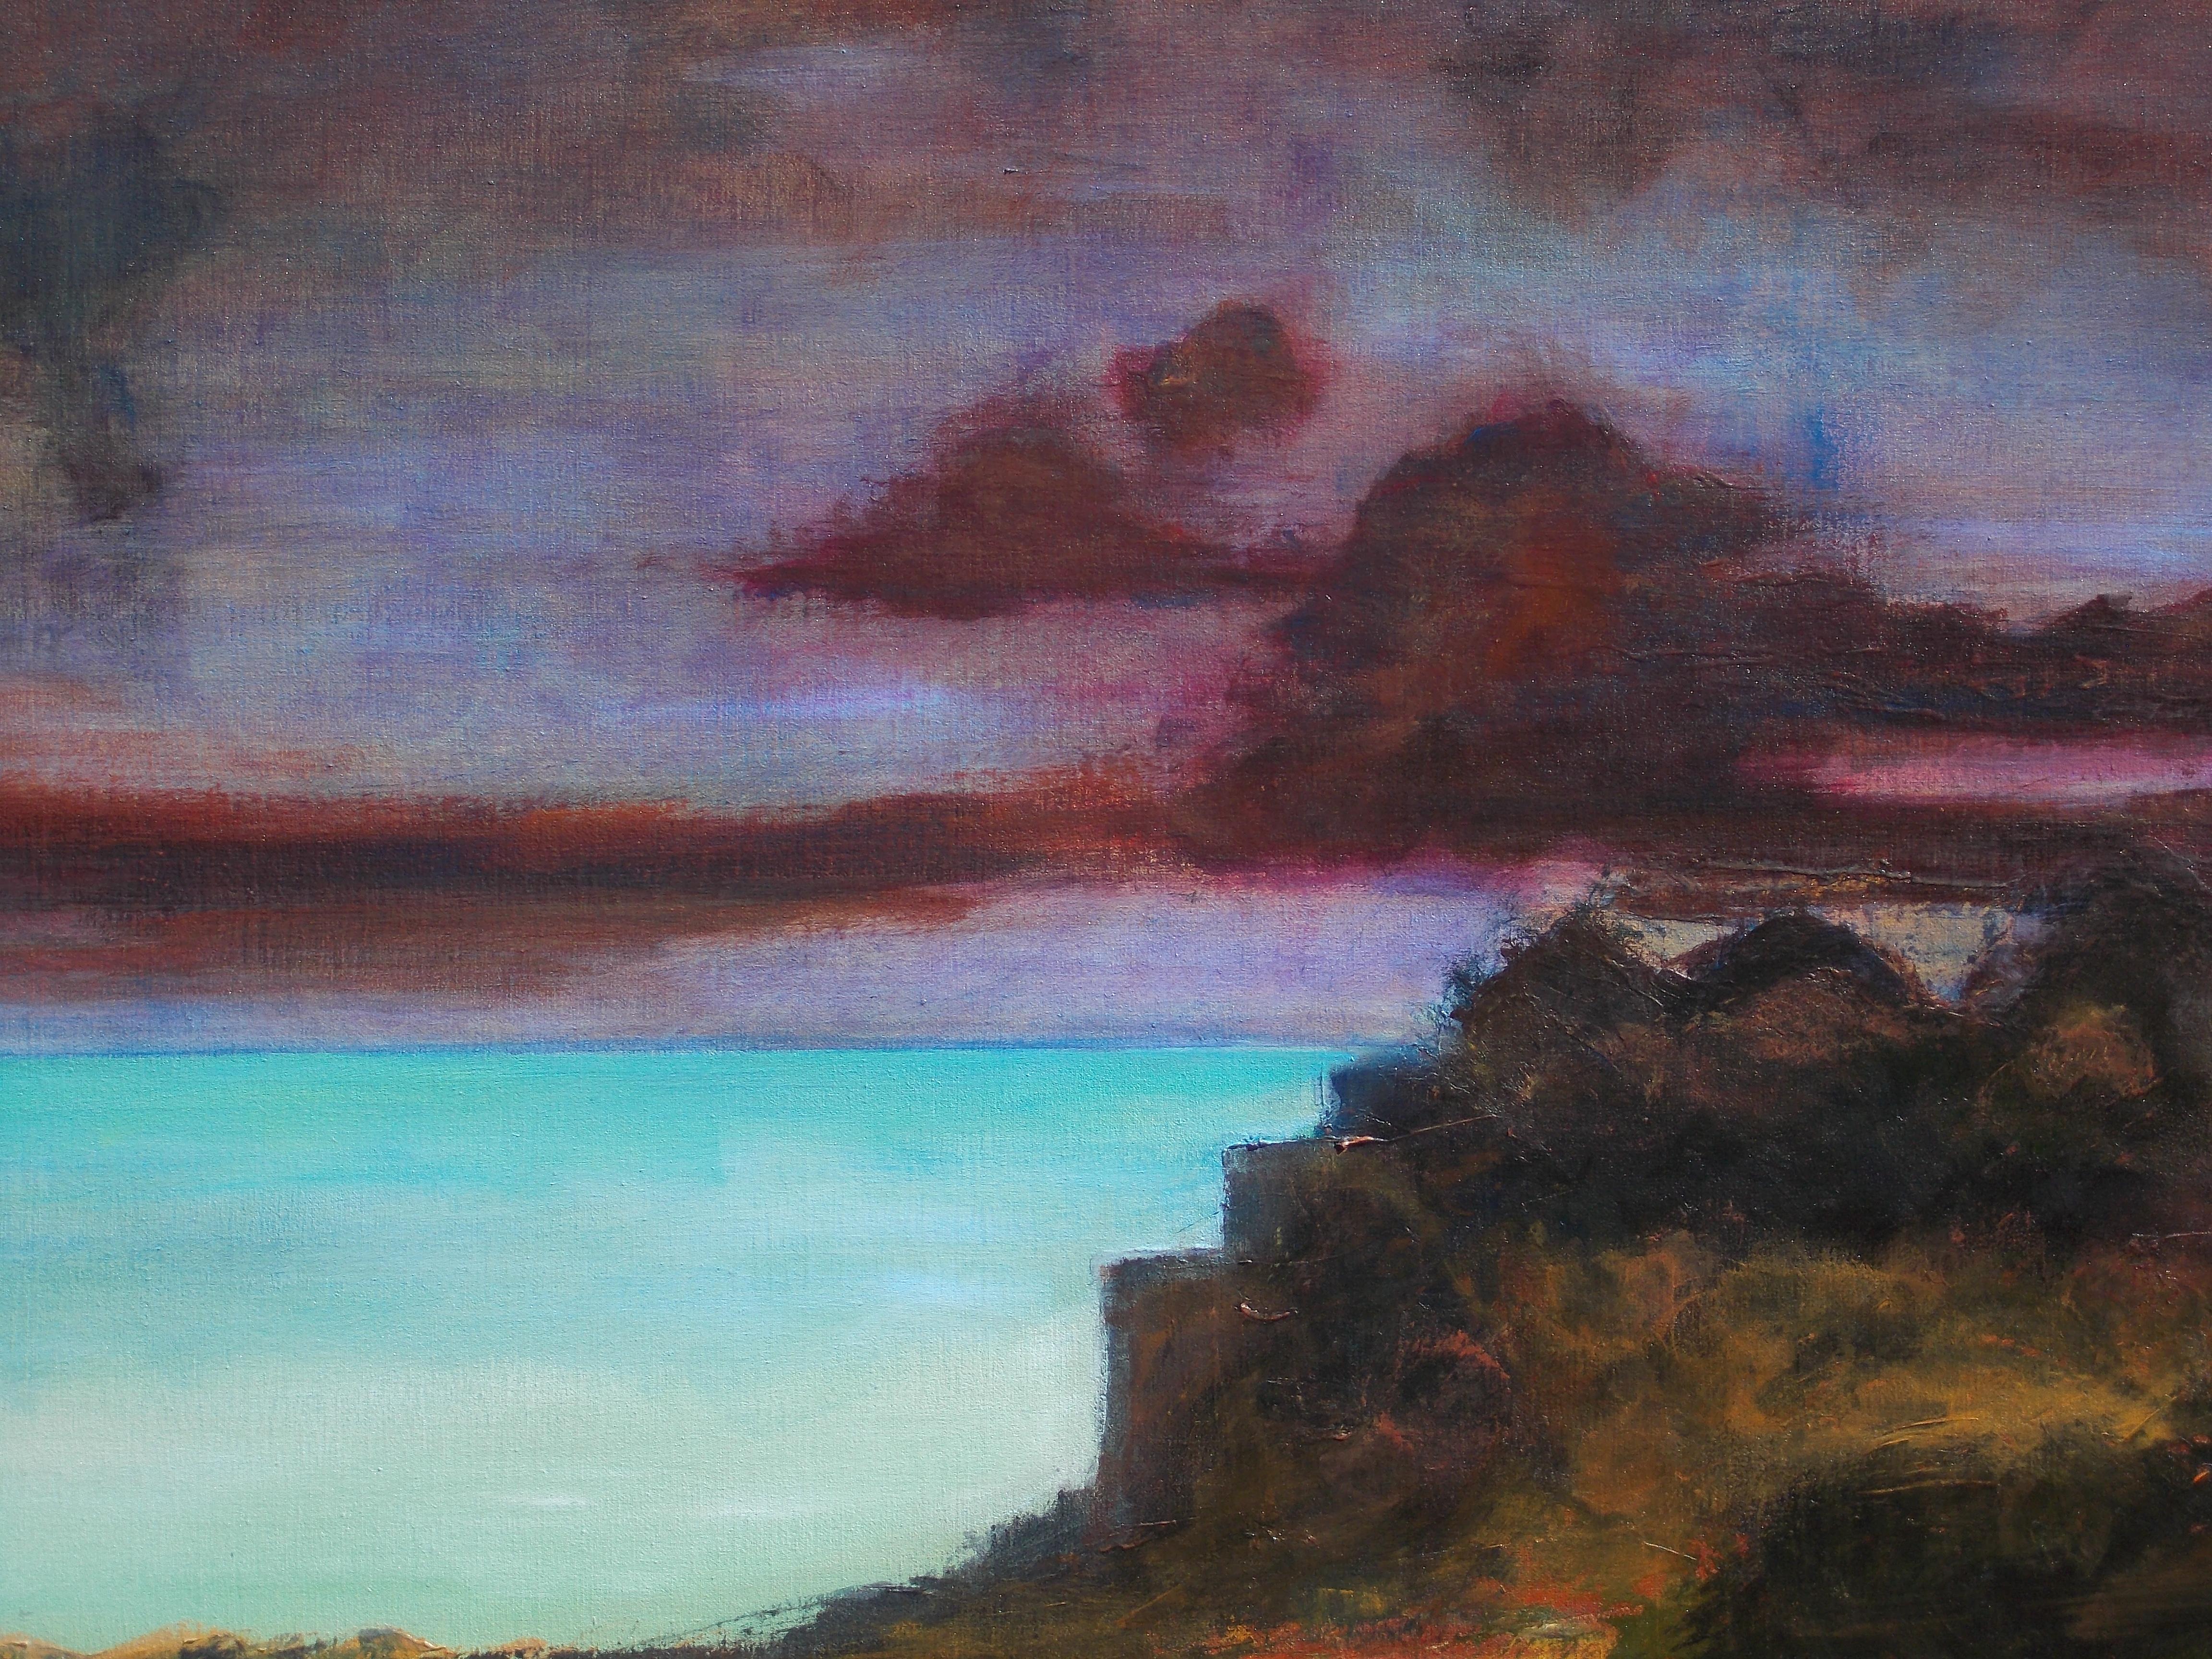 <p>Artist Comments<br />Sunset along the coast. Dark crimson clouds float over the glowing blue water. In the foreground, the landscape radiates with yellow and red. Benjamin explains that, 